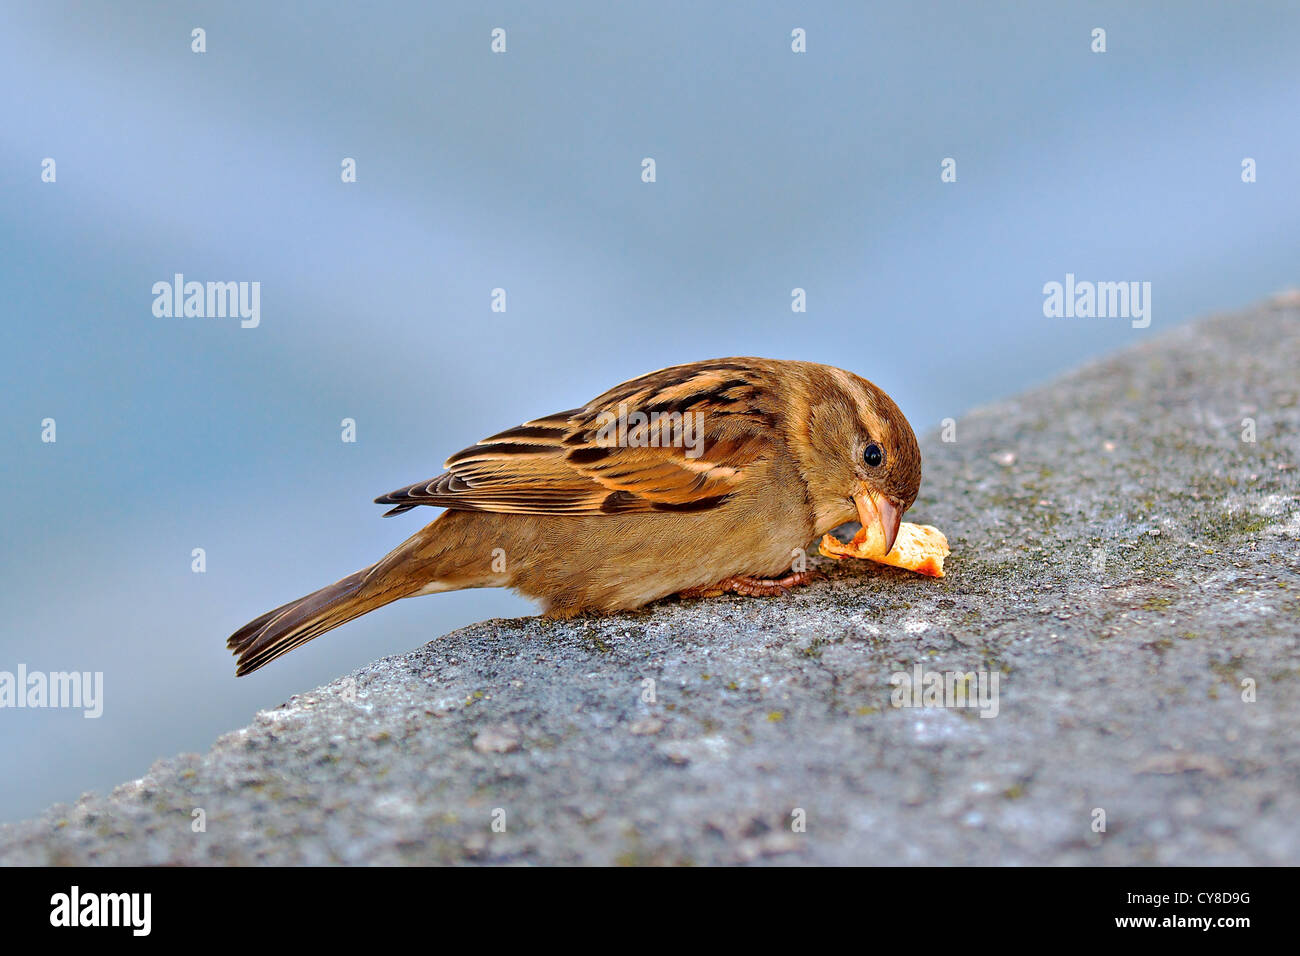 Small brown bird eating piece of crepe Stock Photo